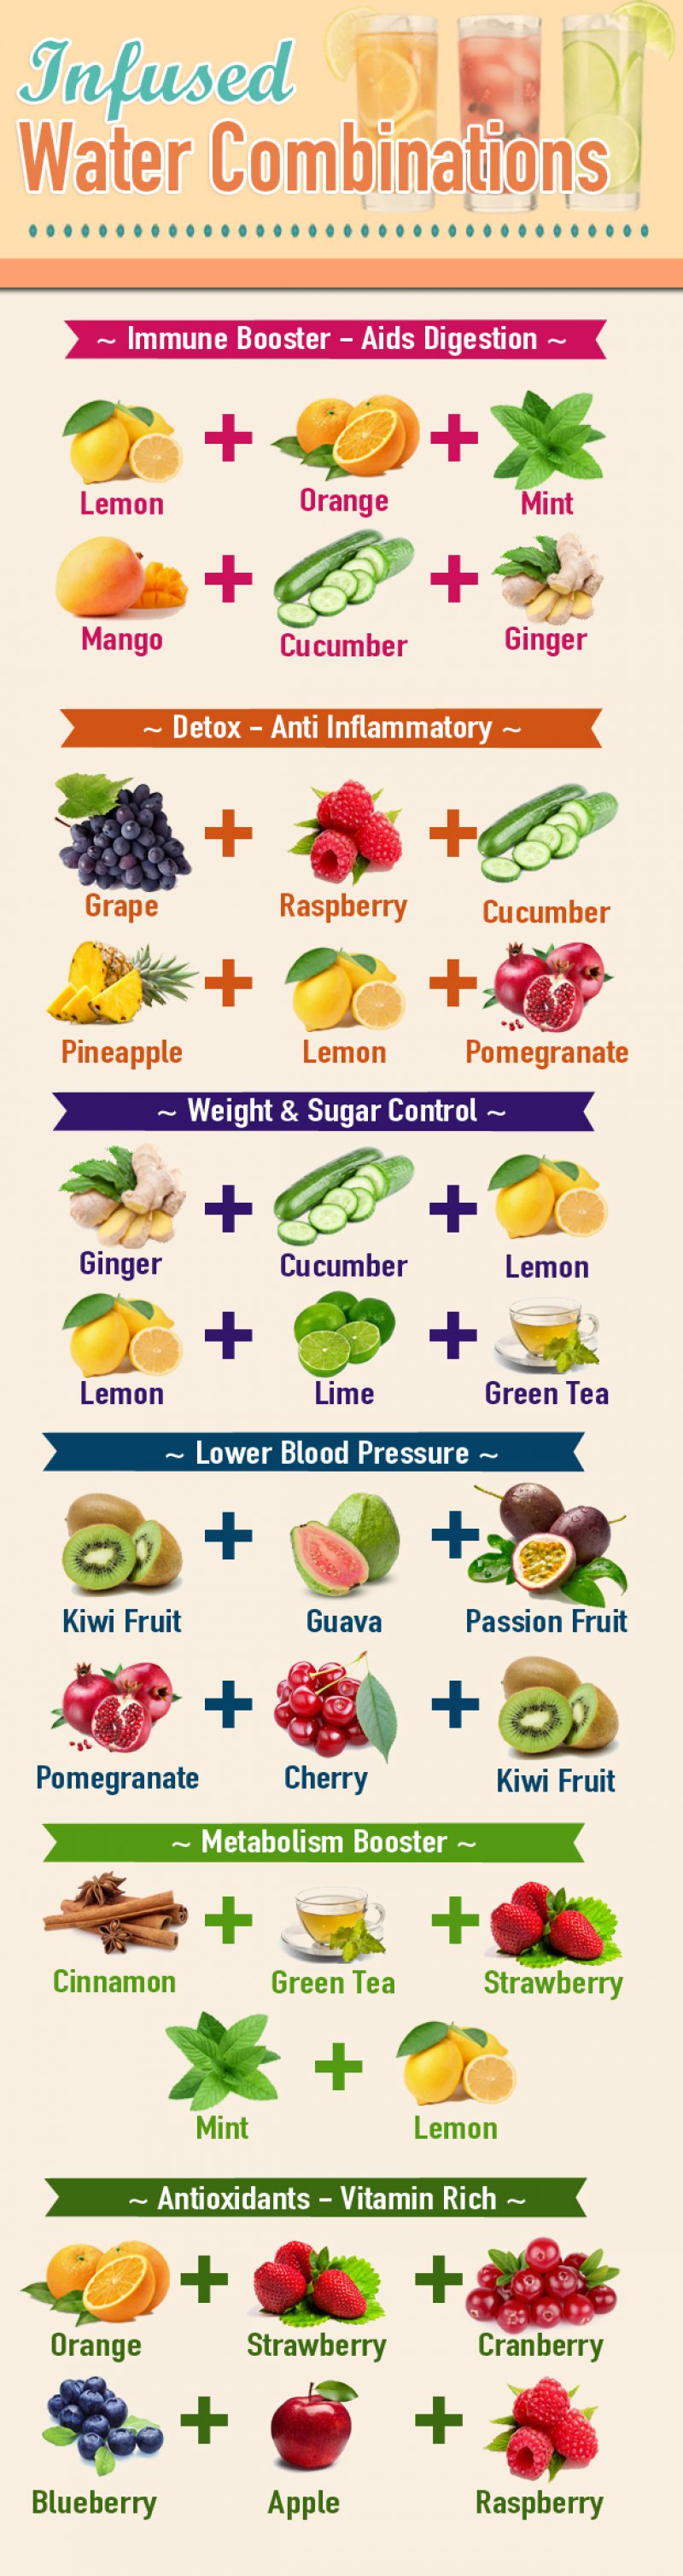 Infused Water Combinations